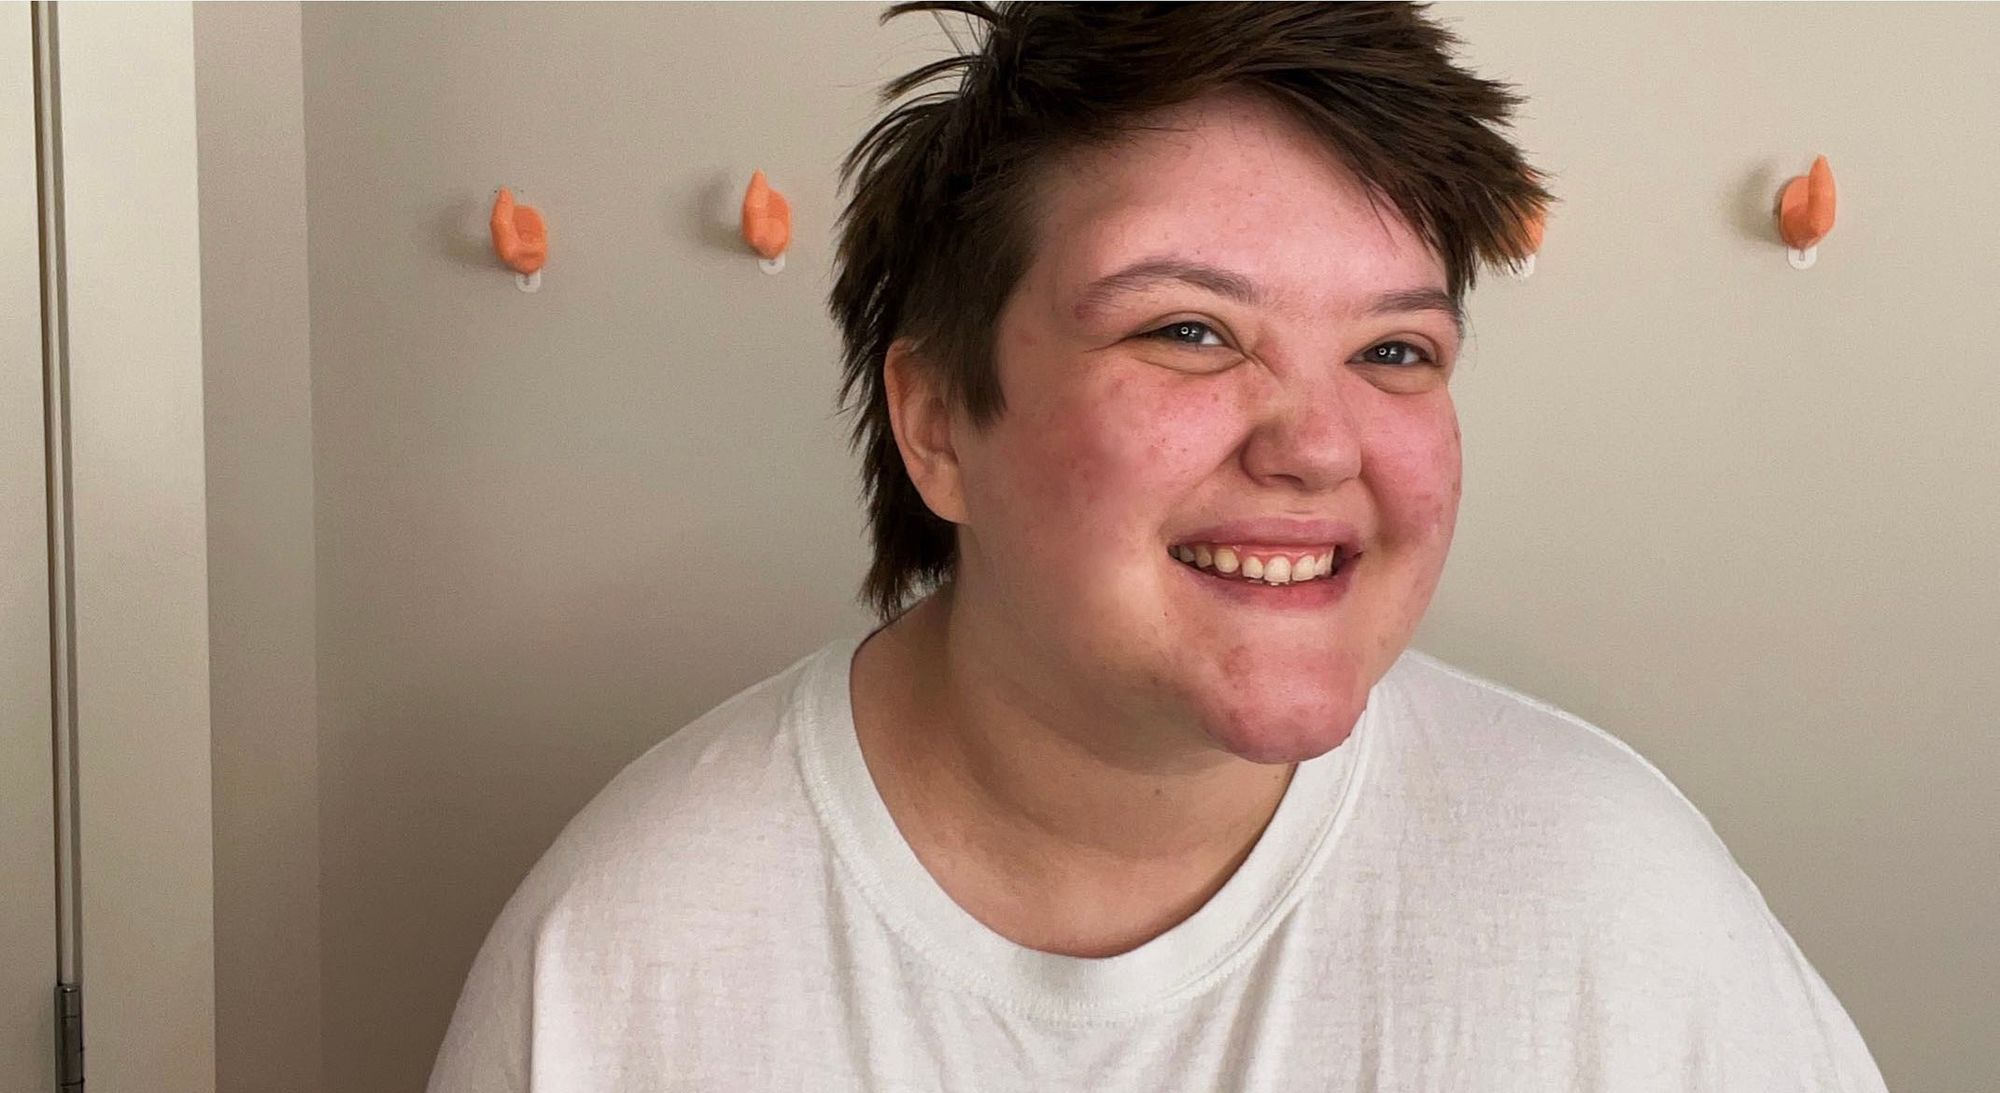 A young person with short hair and wearing a white shirt smiles.